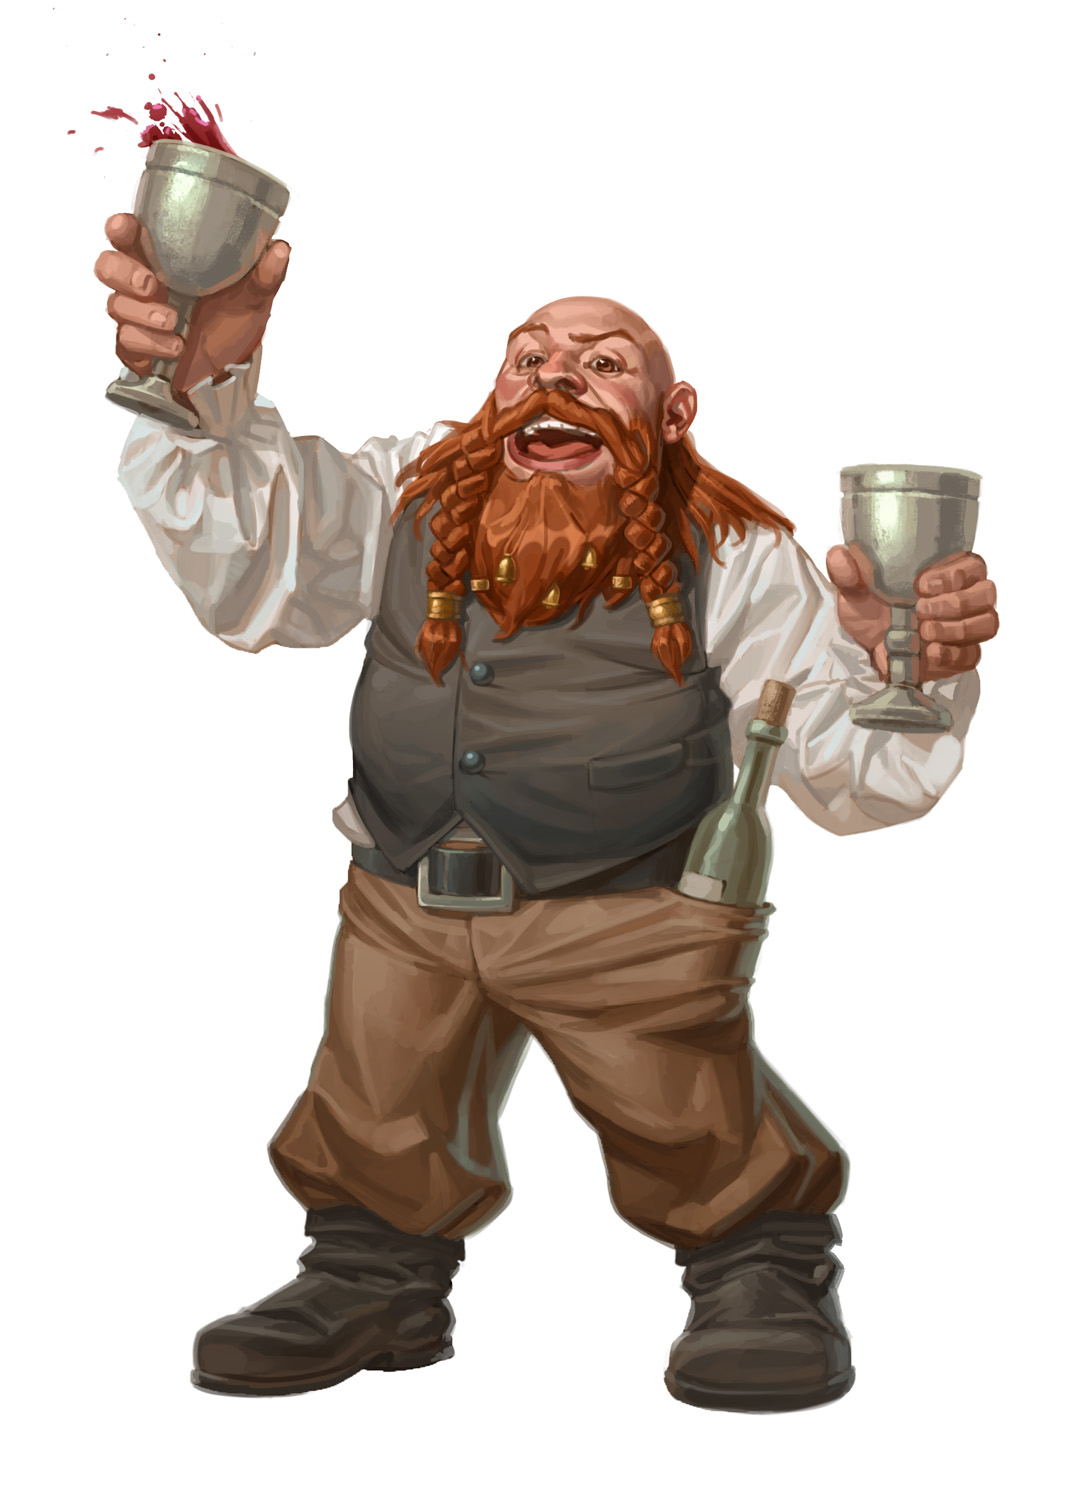 party_dwarf_by_capprotti-d47g5pt.jpg